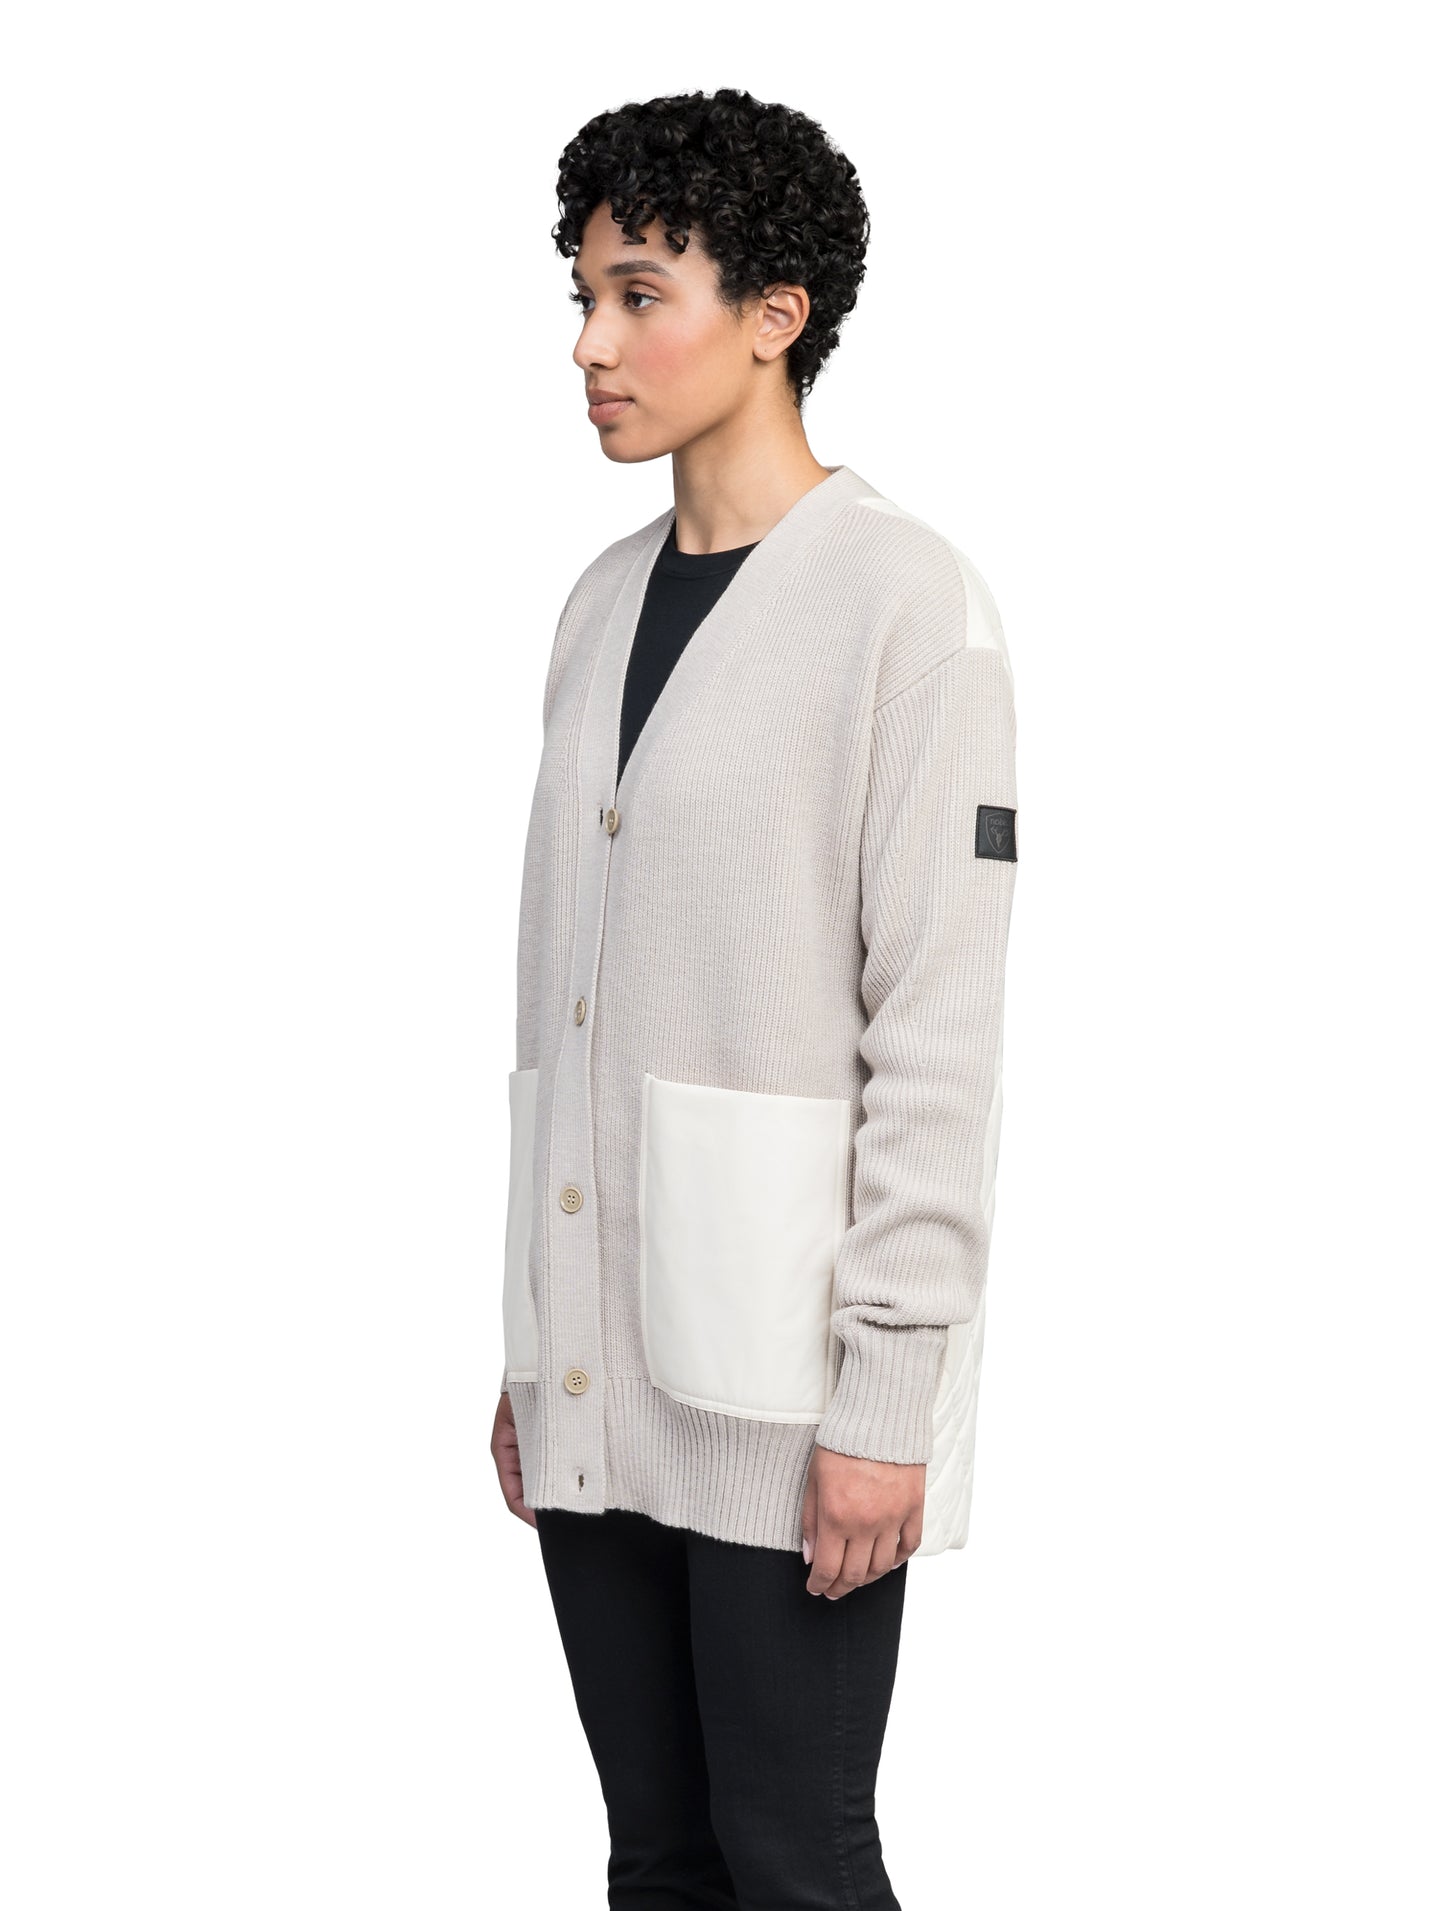 Riga Women's Tailored Button Front Cardigan